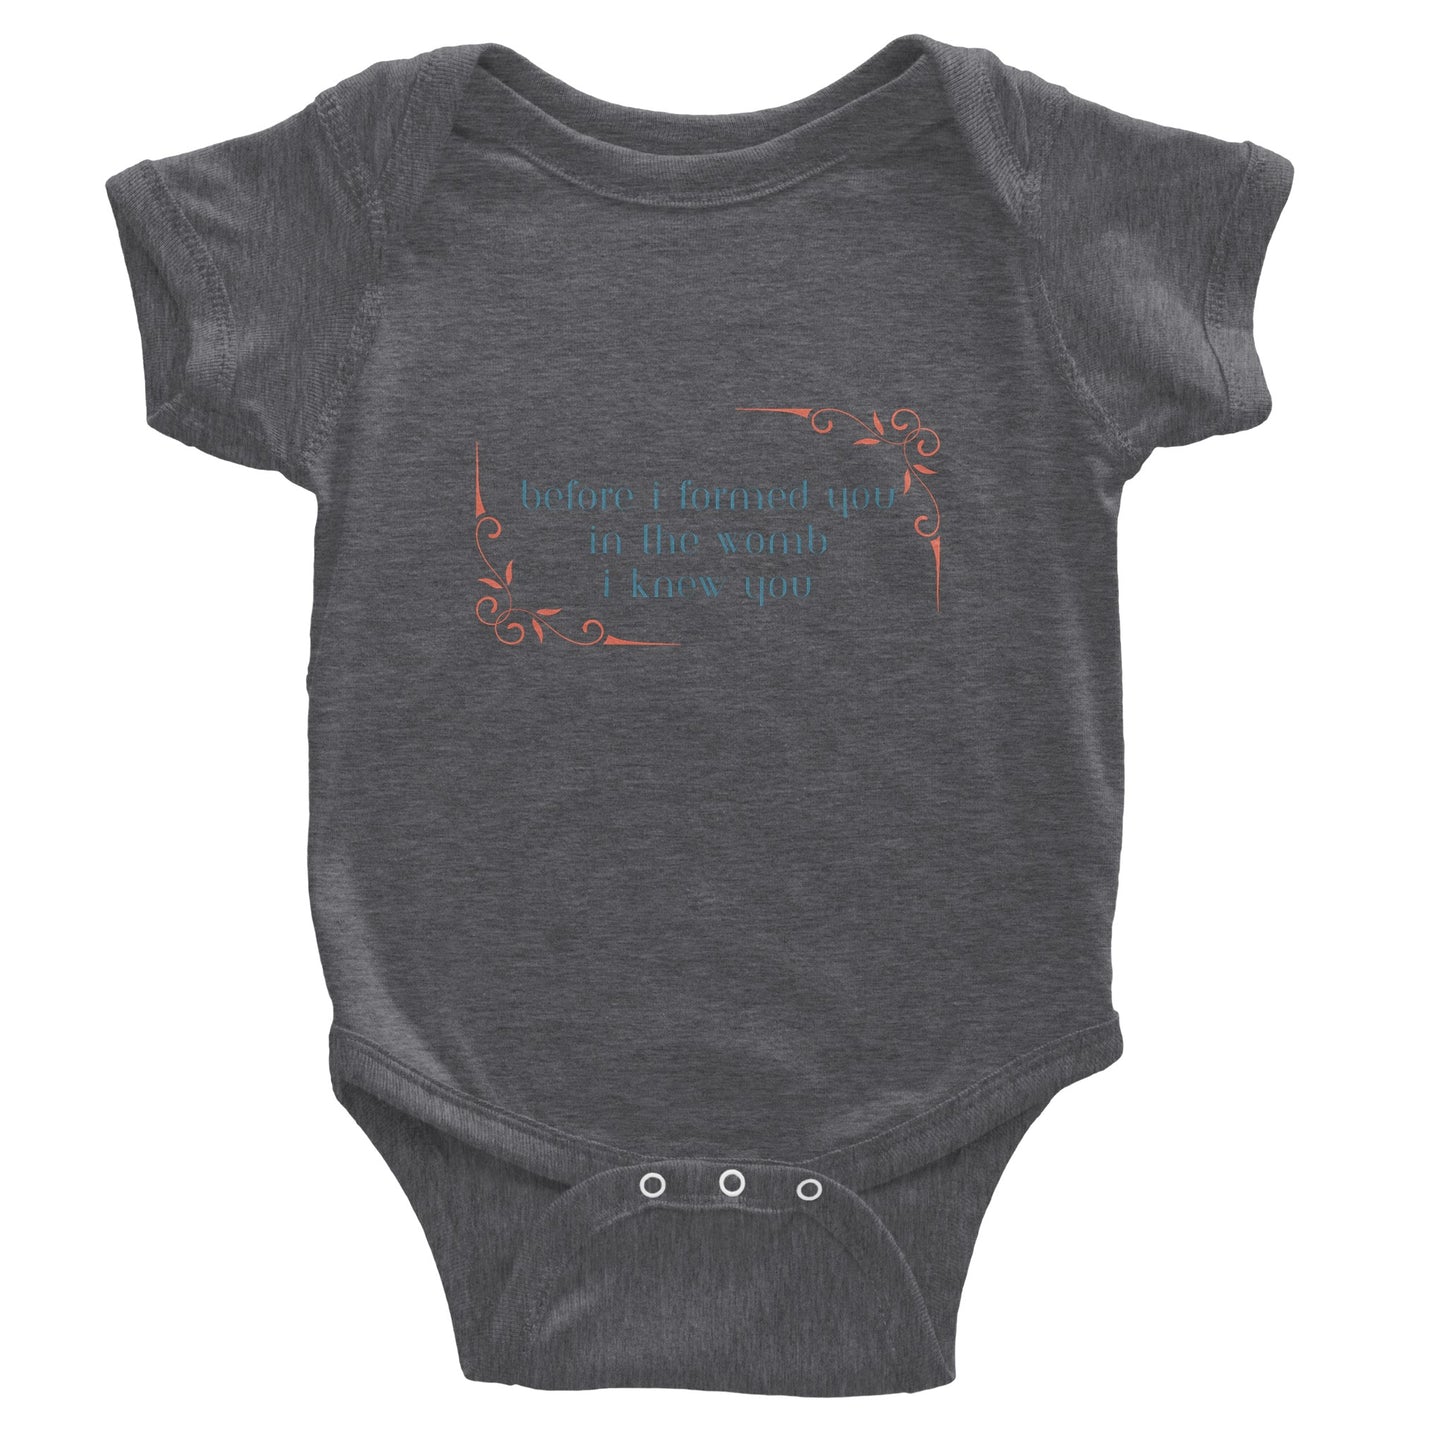 Before I Formed You in the Womb - Classic Baby Short Sleeve Bodysuit